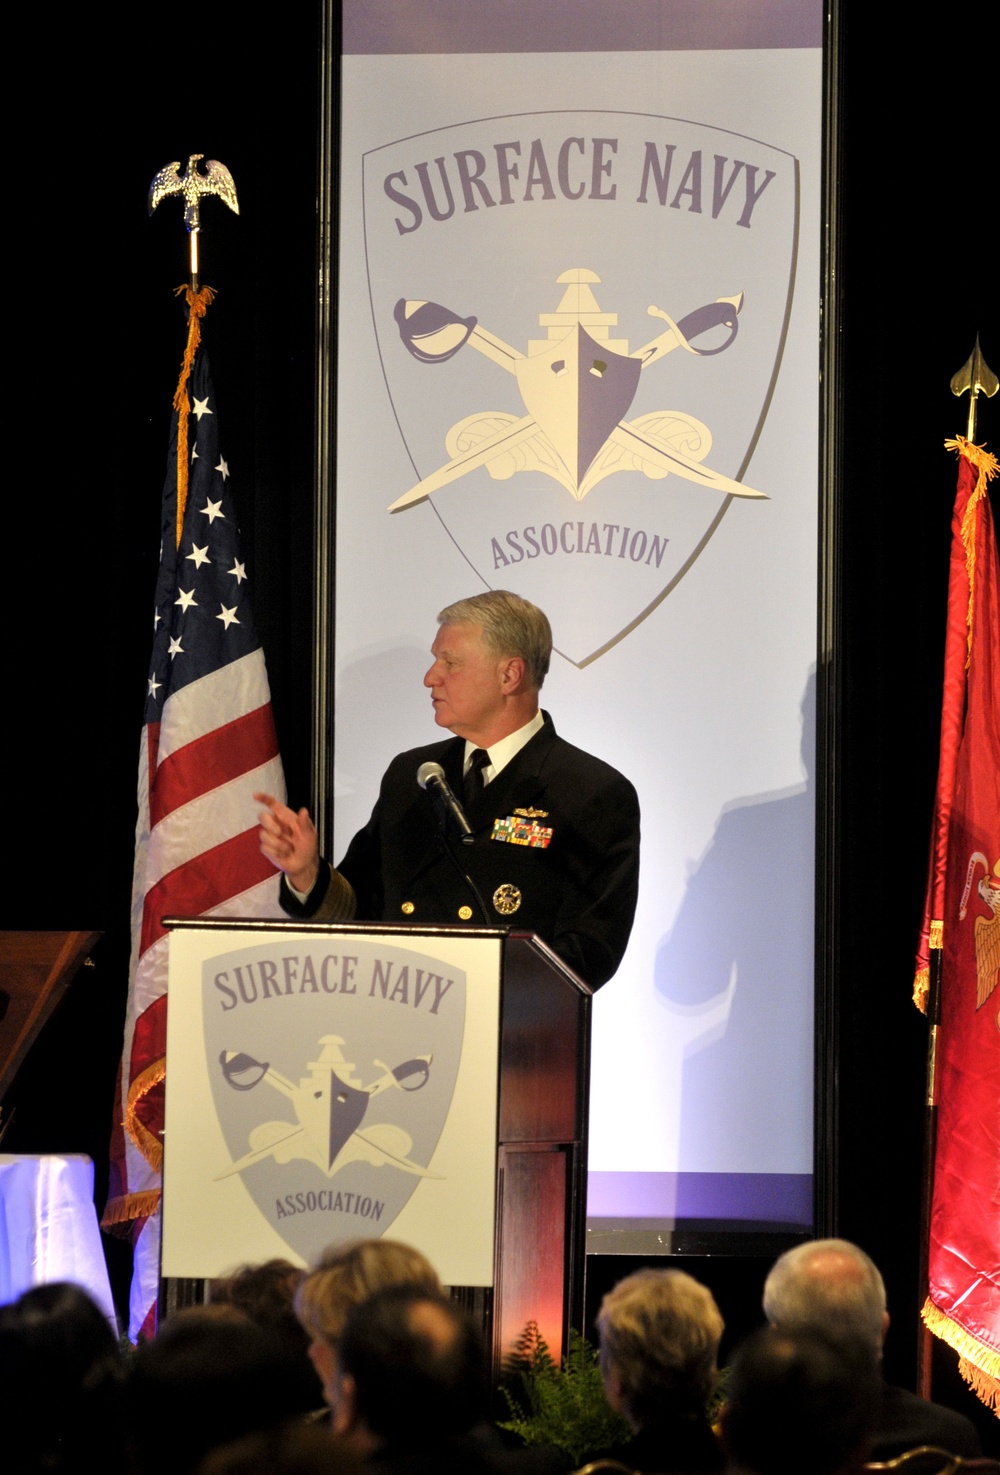 CNO Roughead at 23rd annual Surface Navy Association  symposium